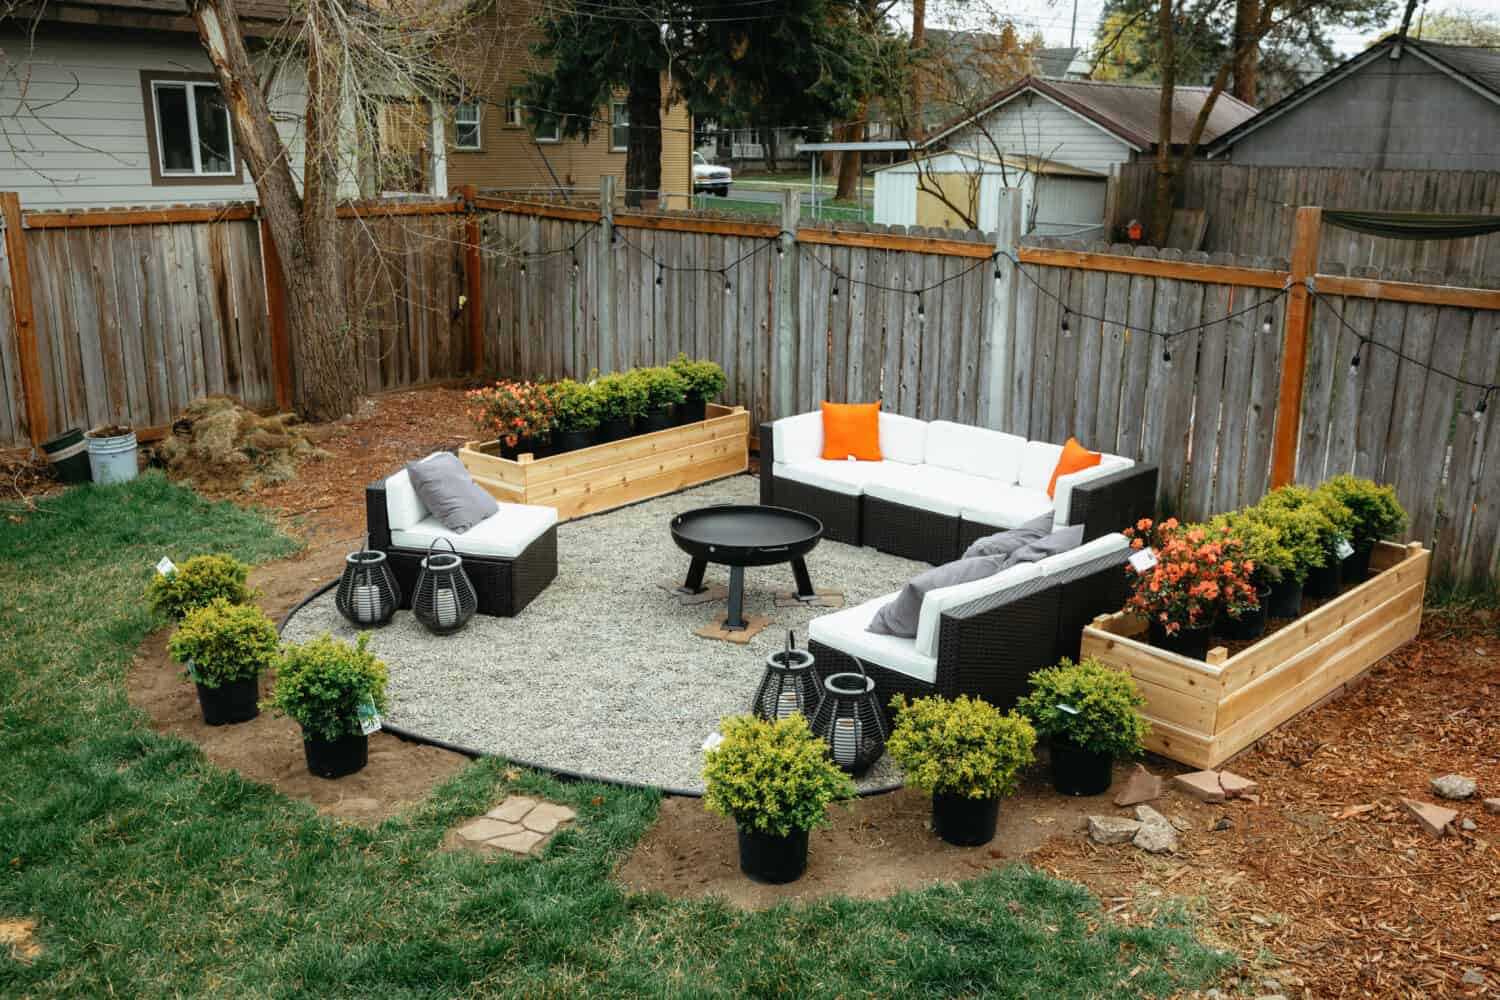 Low Budget Backyard Fire Pit, How Much Does A Backyard Fire Pit Cost To Build